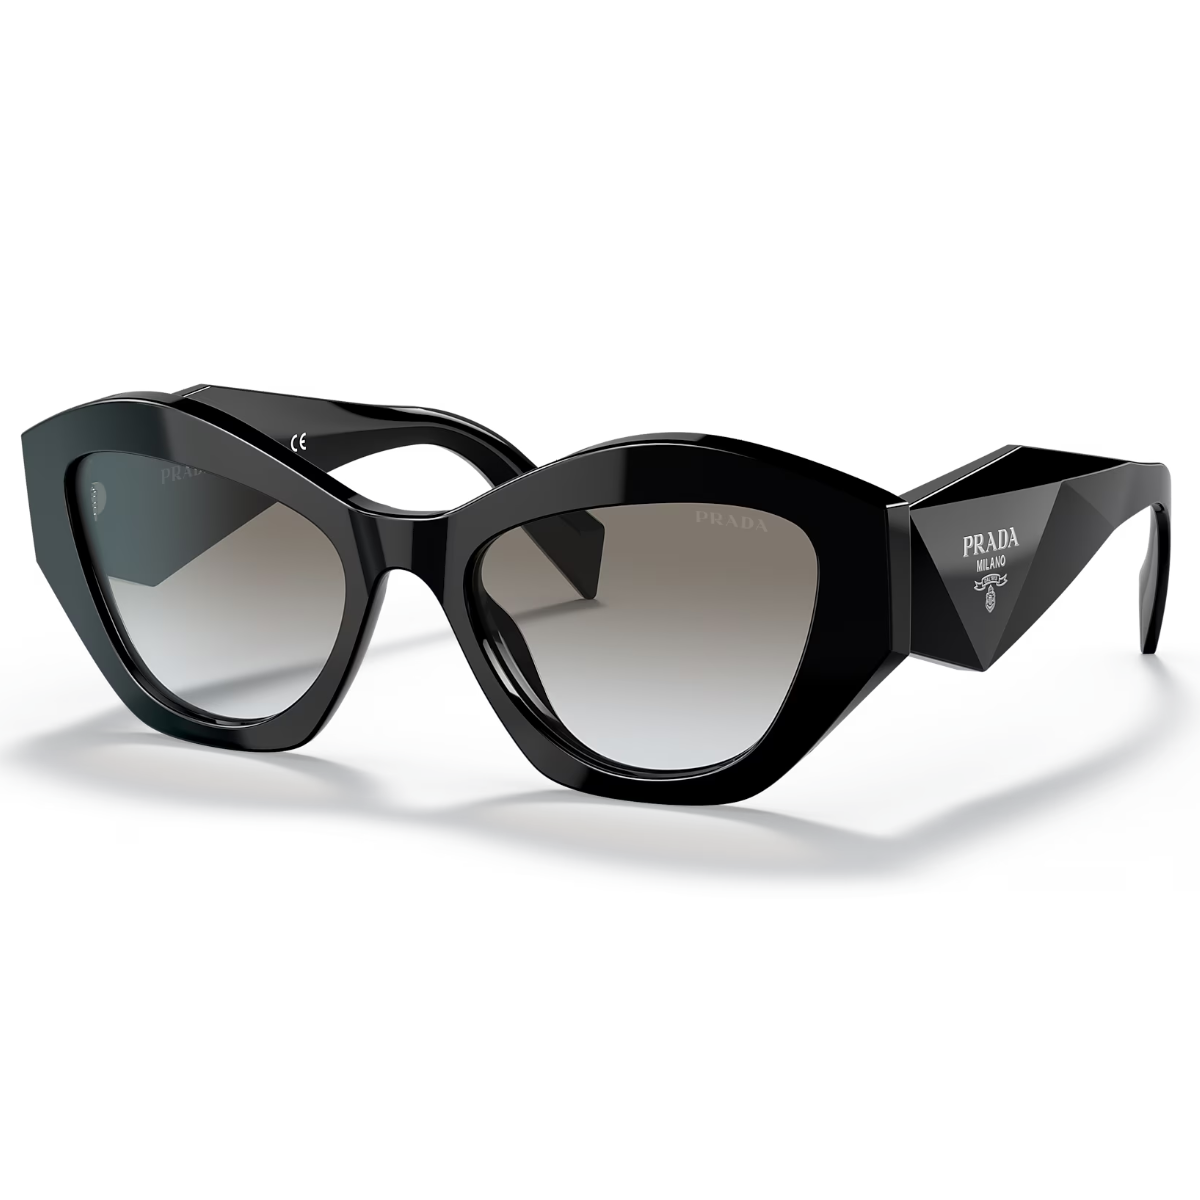 "Discover sophistication with Prada SPR 07Y sunglasses, enhancing your look with cat eye design for both men and women at Optorium."